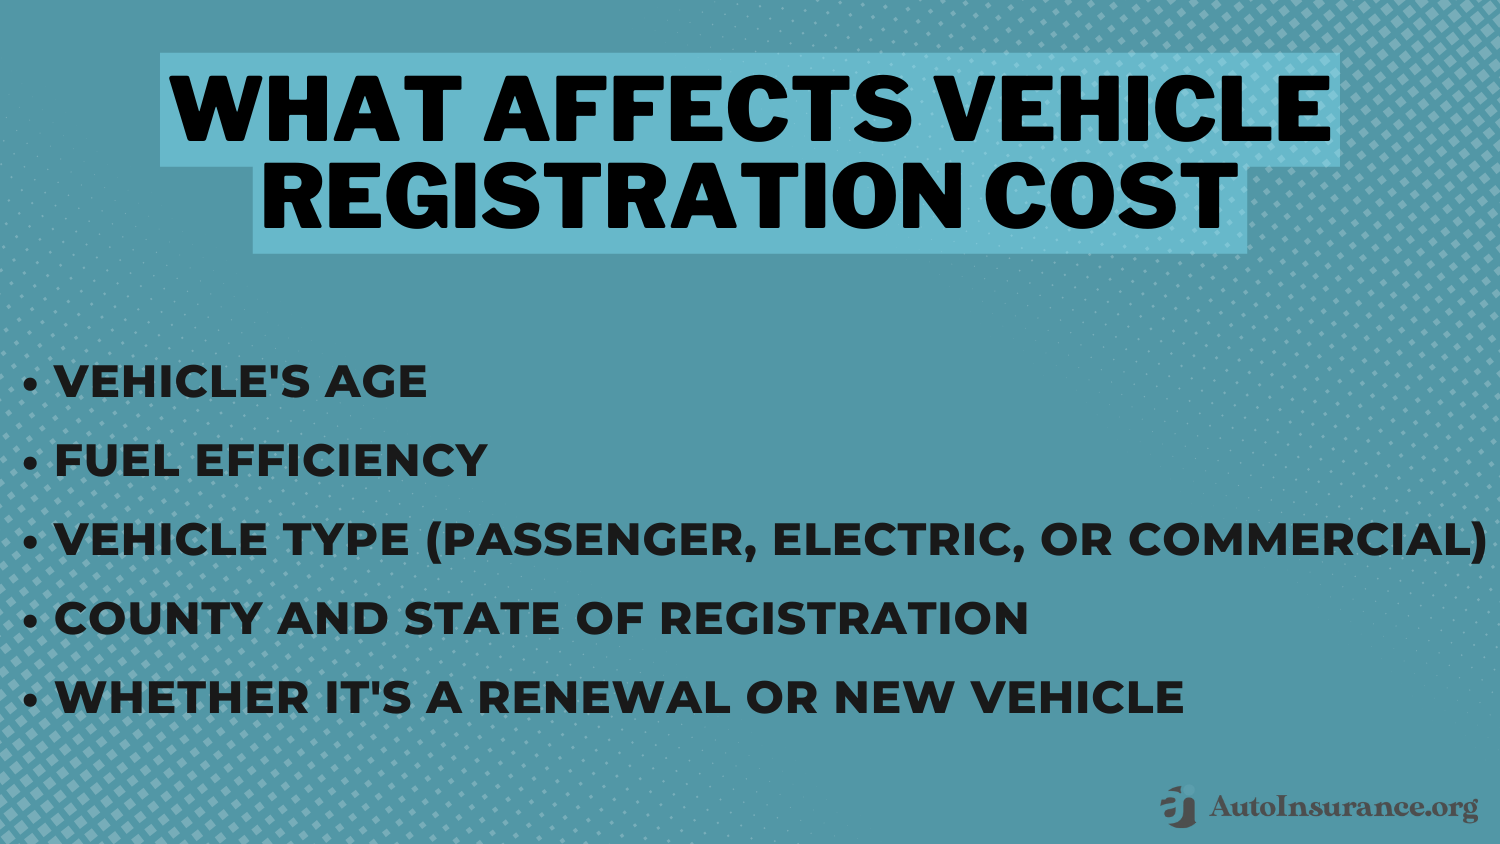 Vehicle Registration Fees by State: What Affects Vehicle Registration Cost